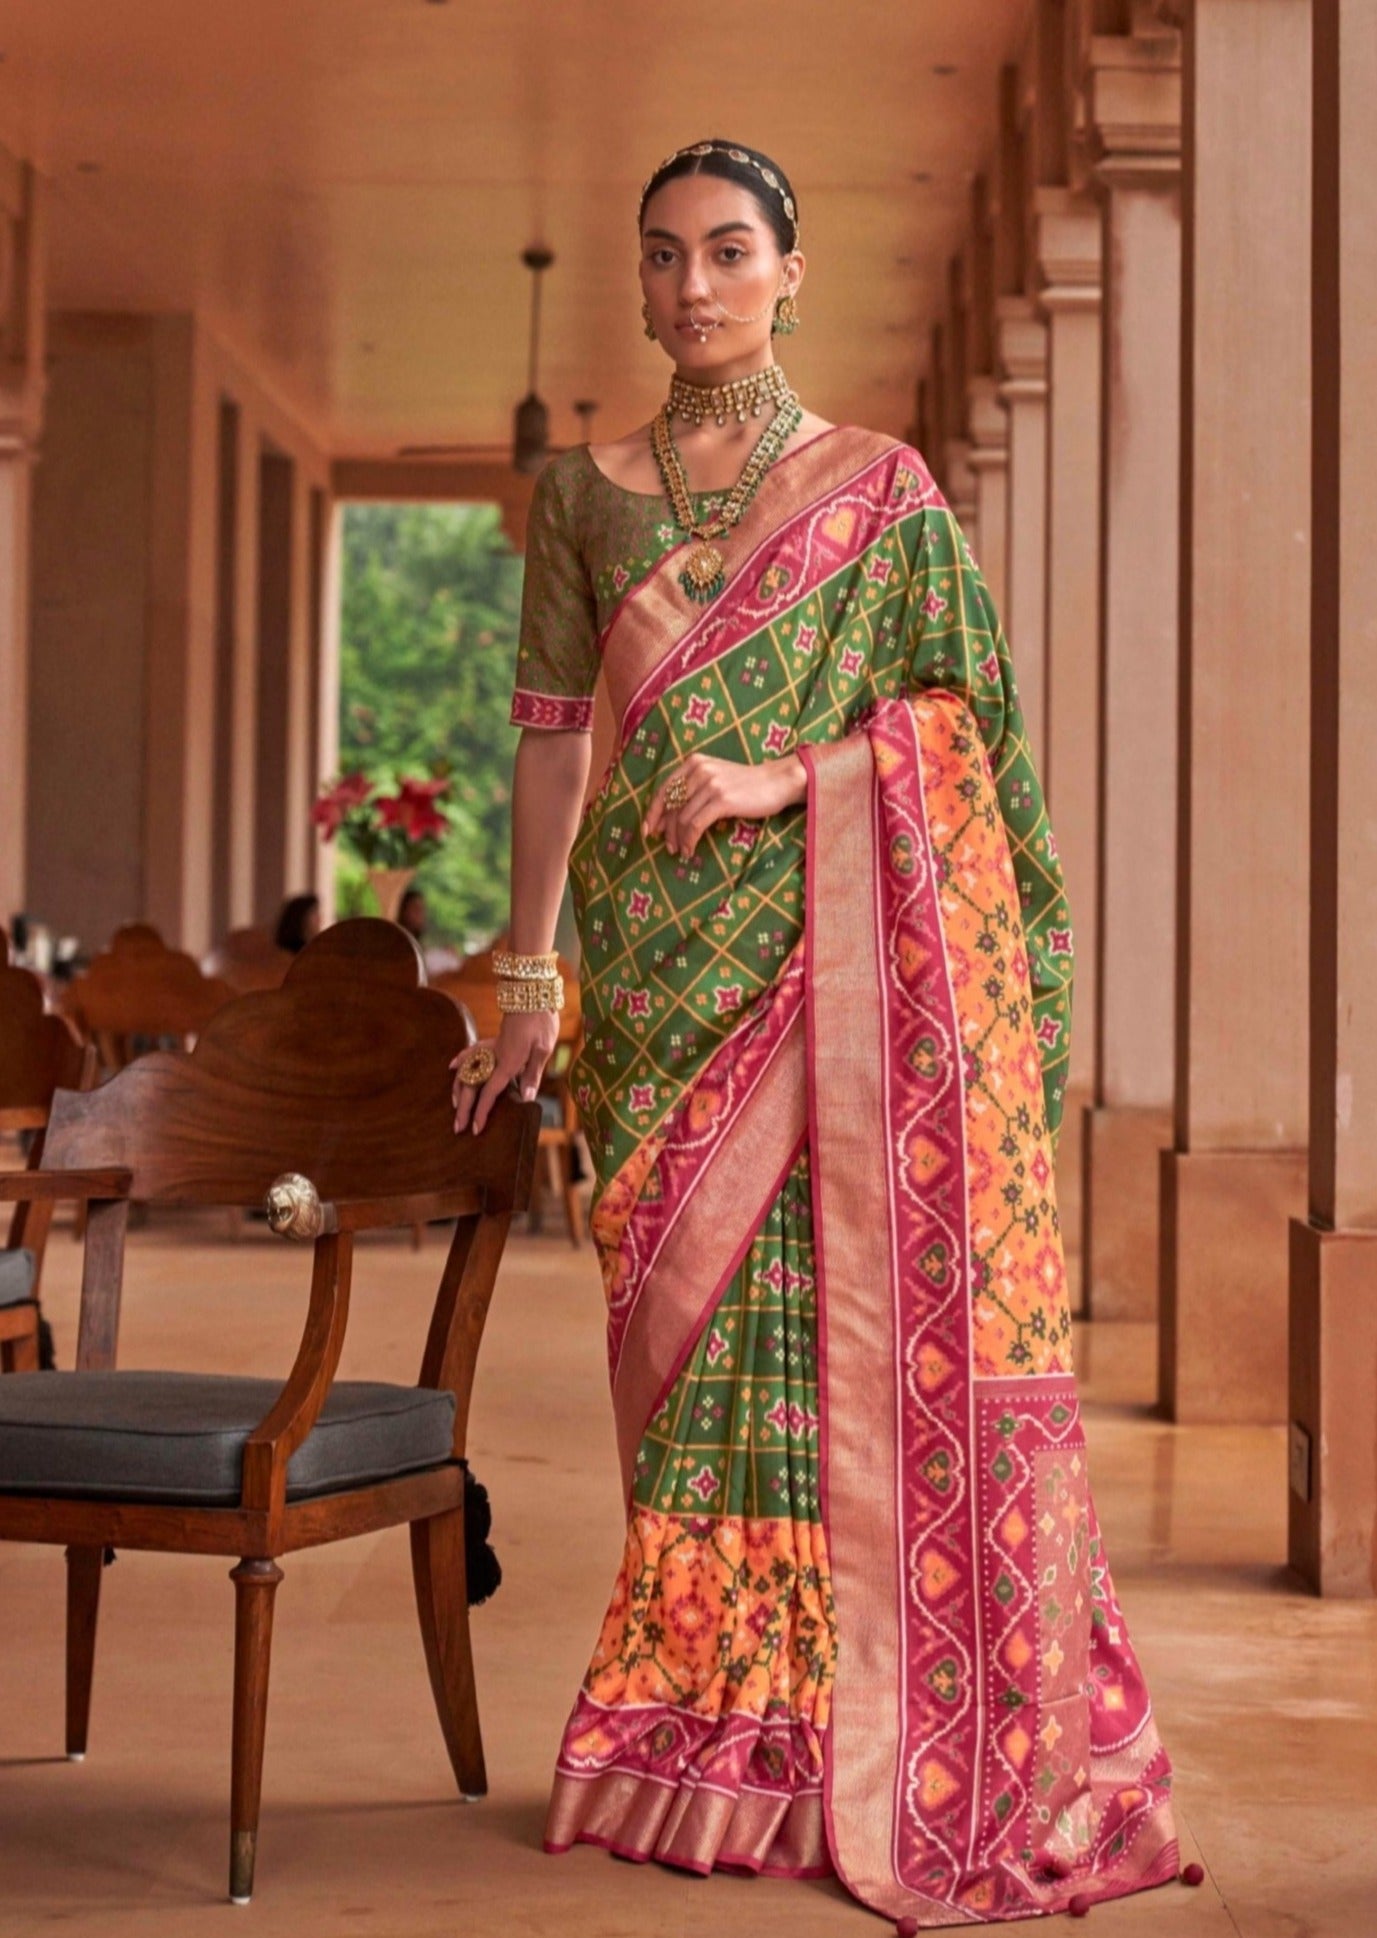 Woman standing against chair wearing green-ikat-patola-saree